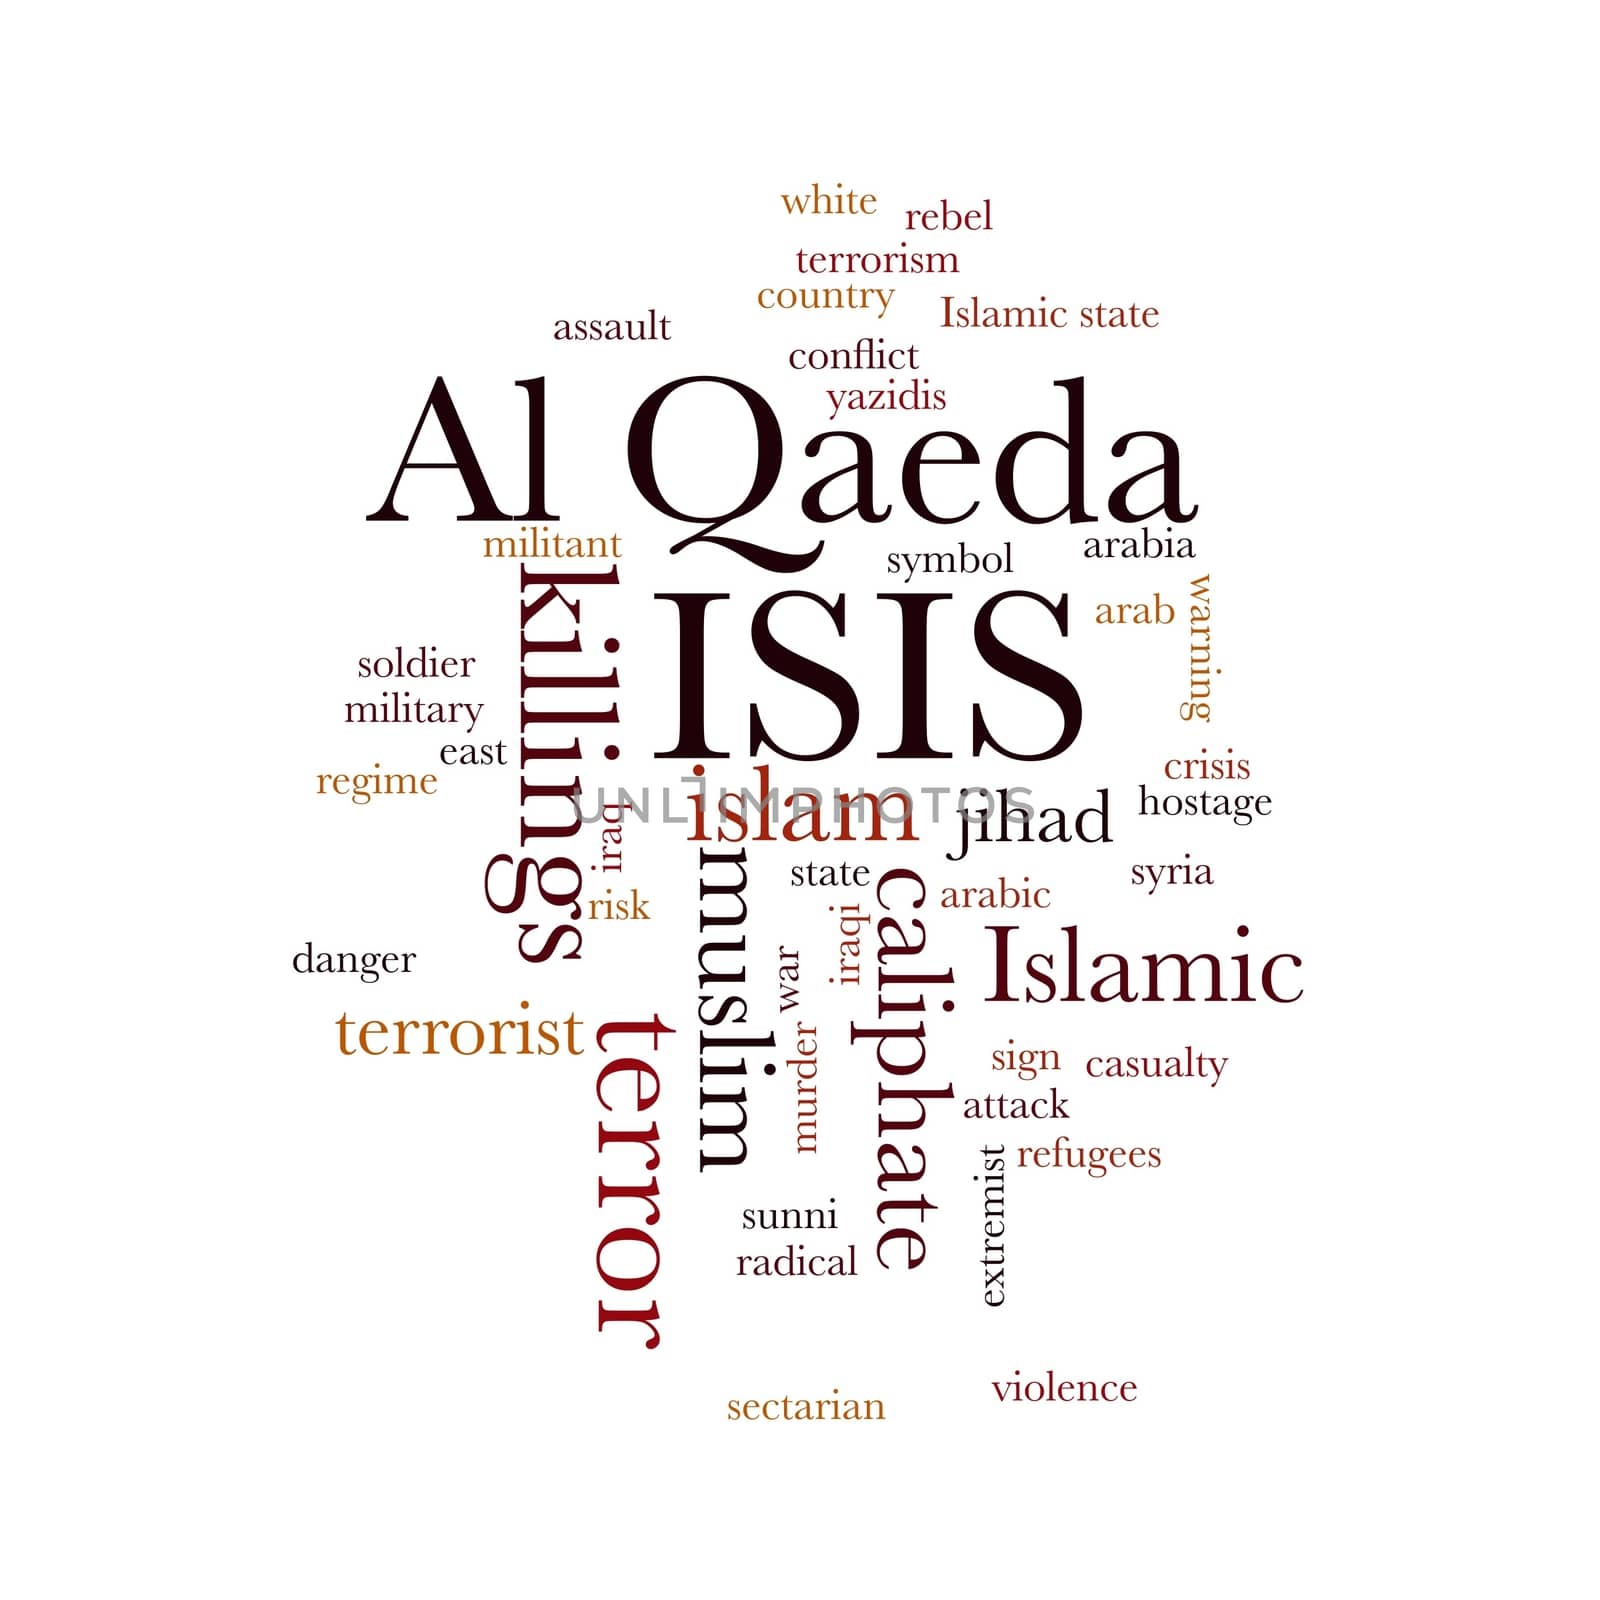 ISIS and Al Qaeda word cloud on white background.